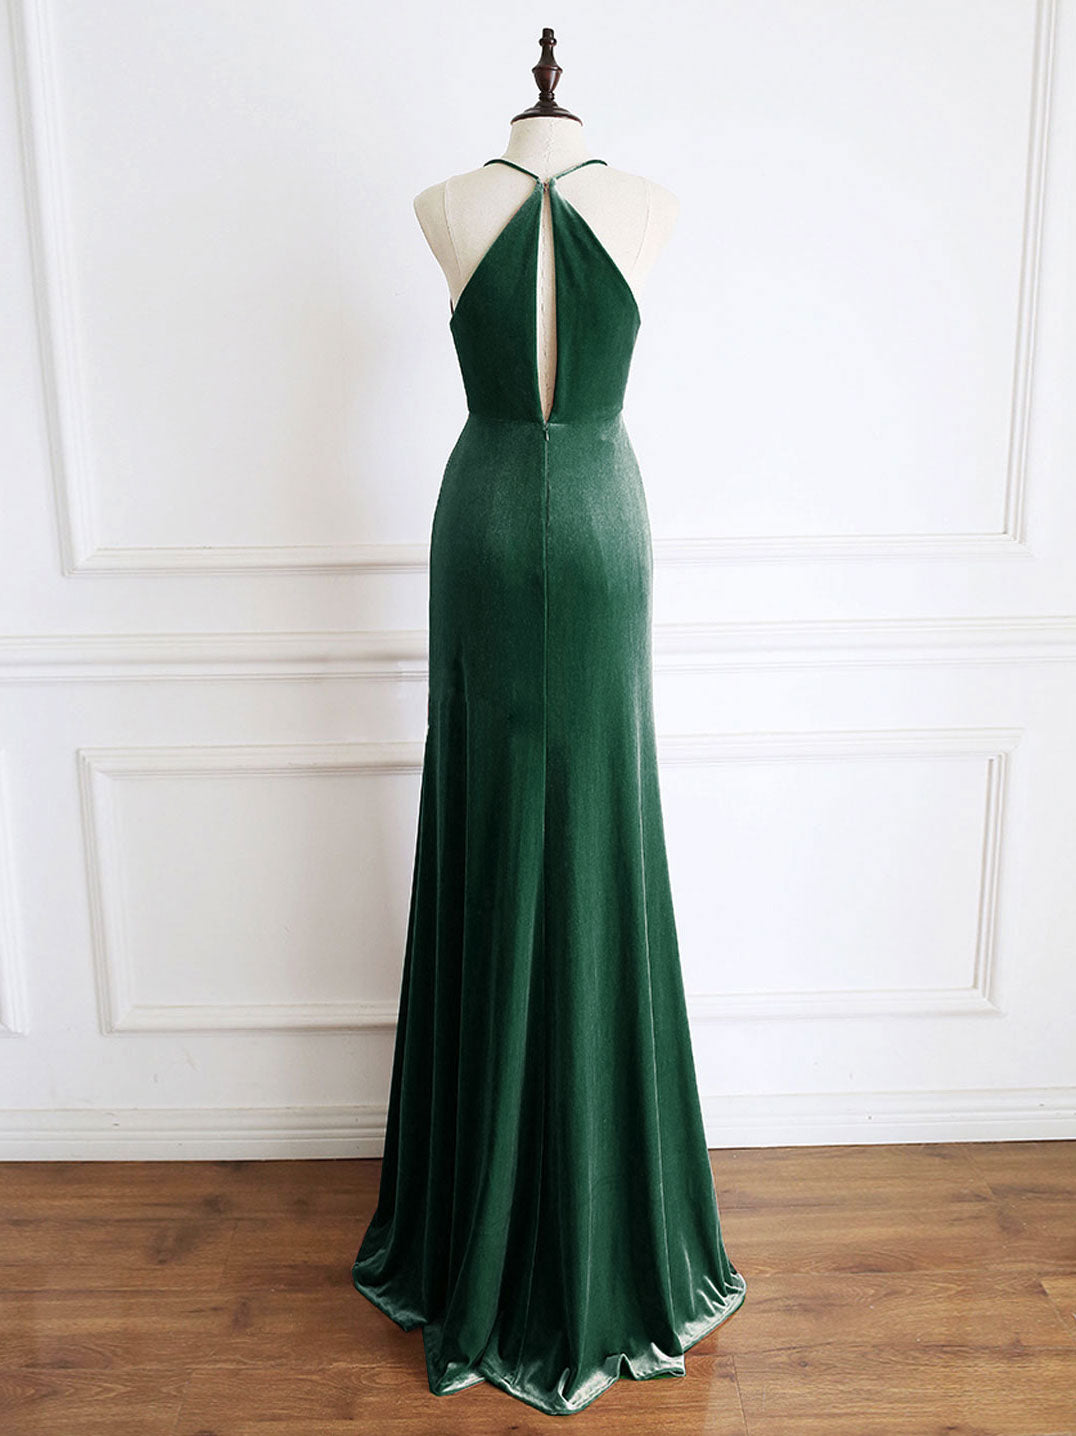 Sophisticated Long Sleeve Satin Emerald Evening Gown 7478 – Sparkly Gowns